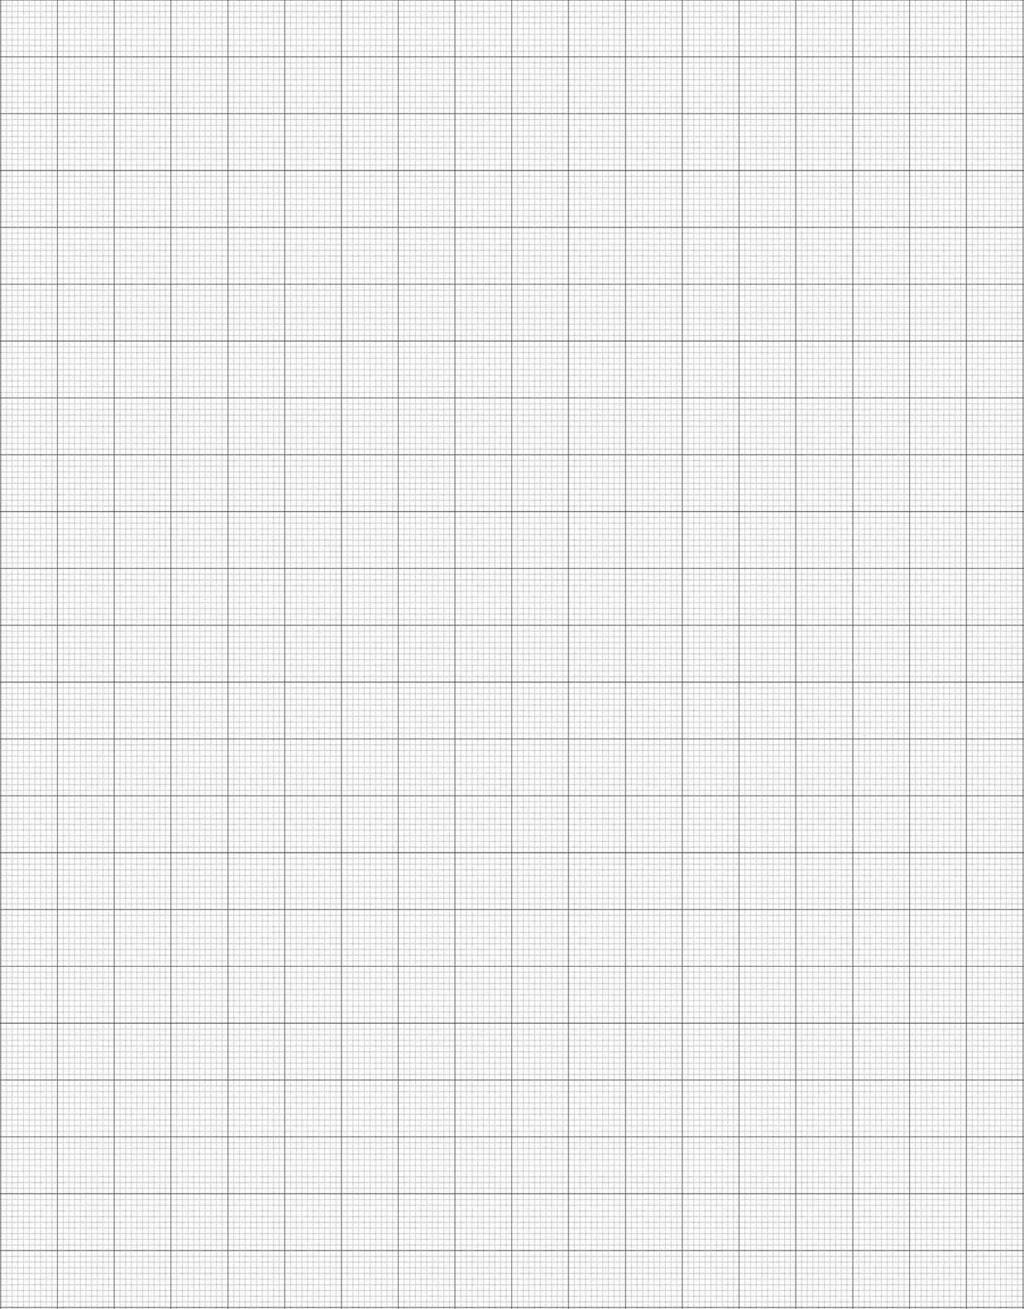 6) Graph on the grid provided using your table (by 1s for, by 200s